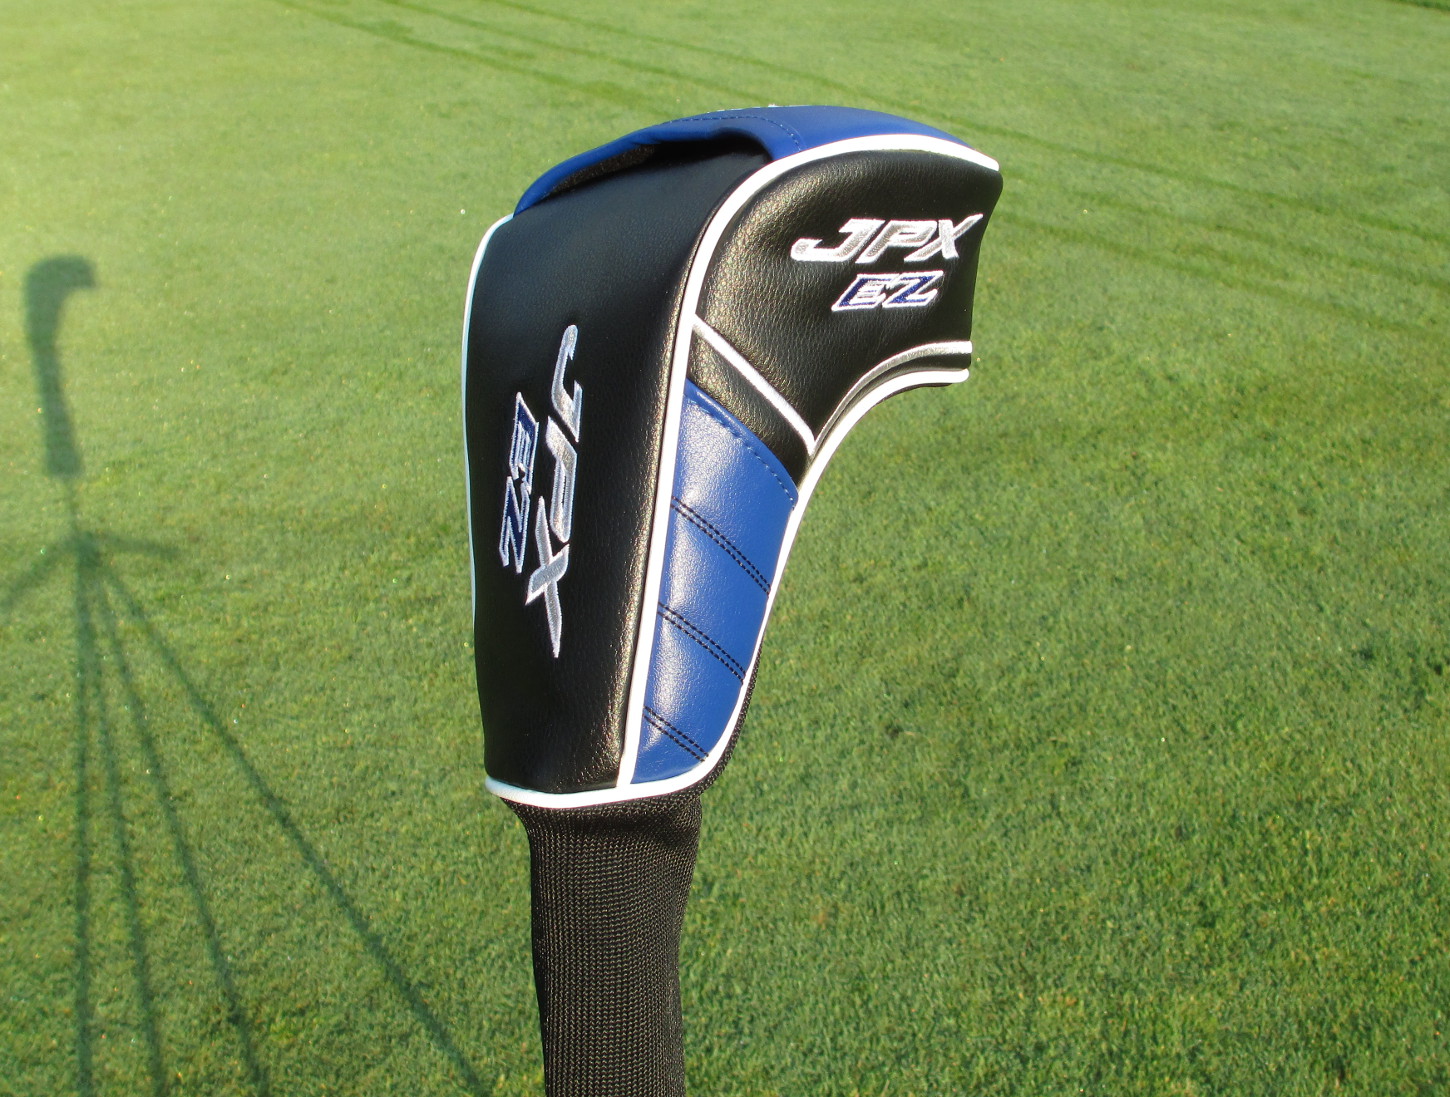 Mizuno provides an attractive and protective headcover with the EZ.